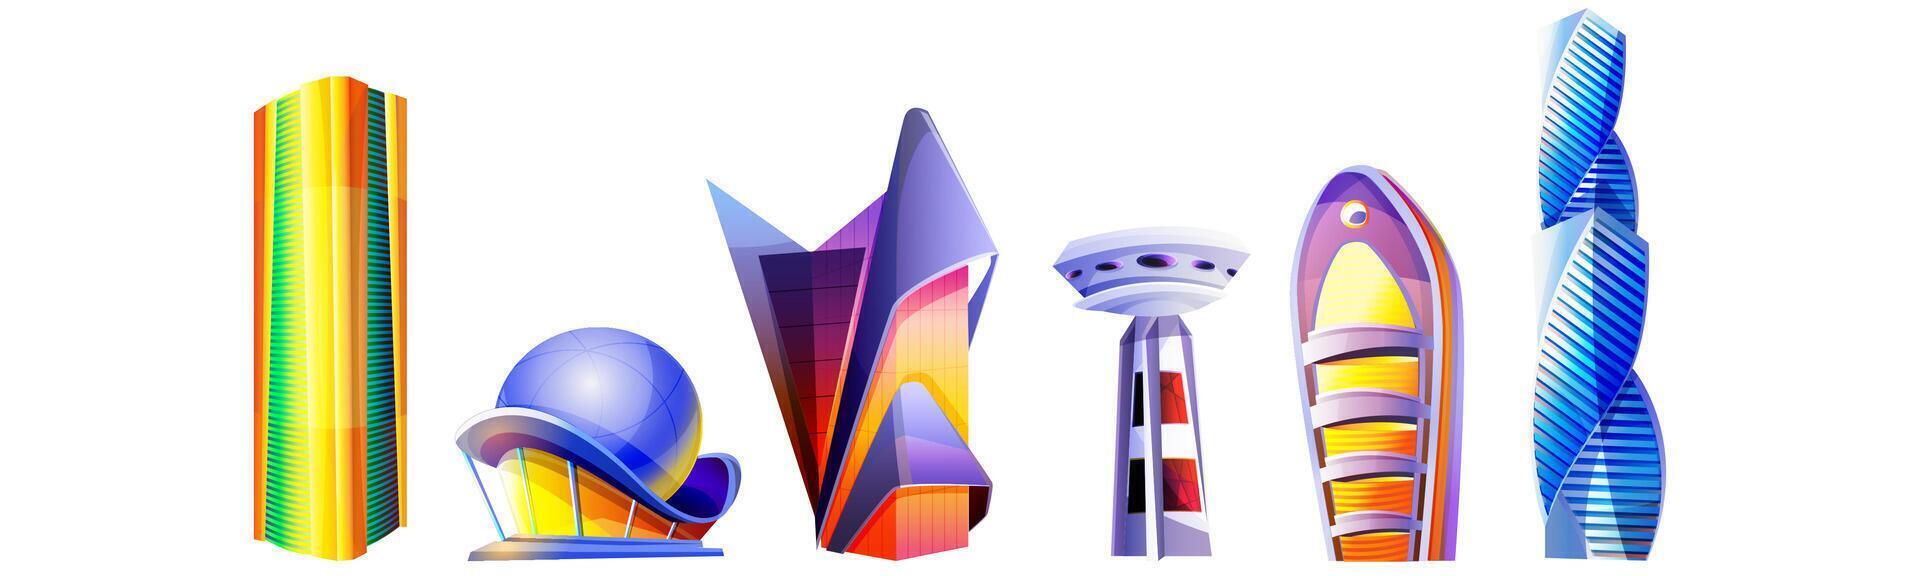 Cartoon set futuristic buildings unusual shapes with glass facade and domes isolated on white background. Future city. Modern style skyscrapers and architecture towers. Alien urban cityscape design. vector